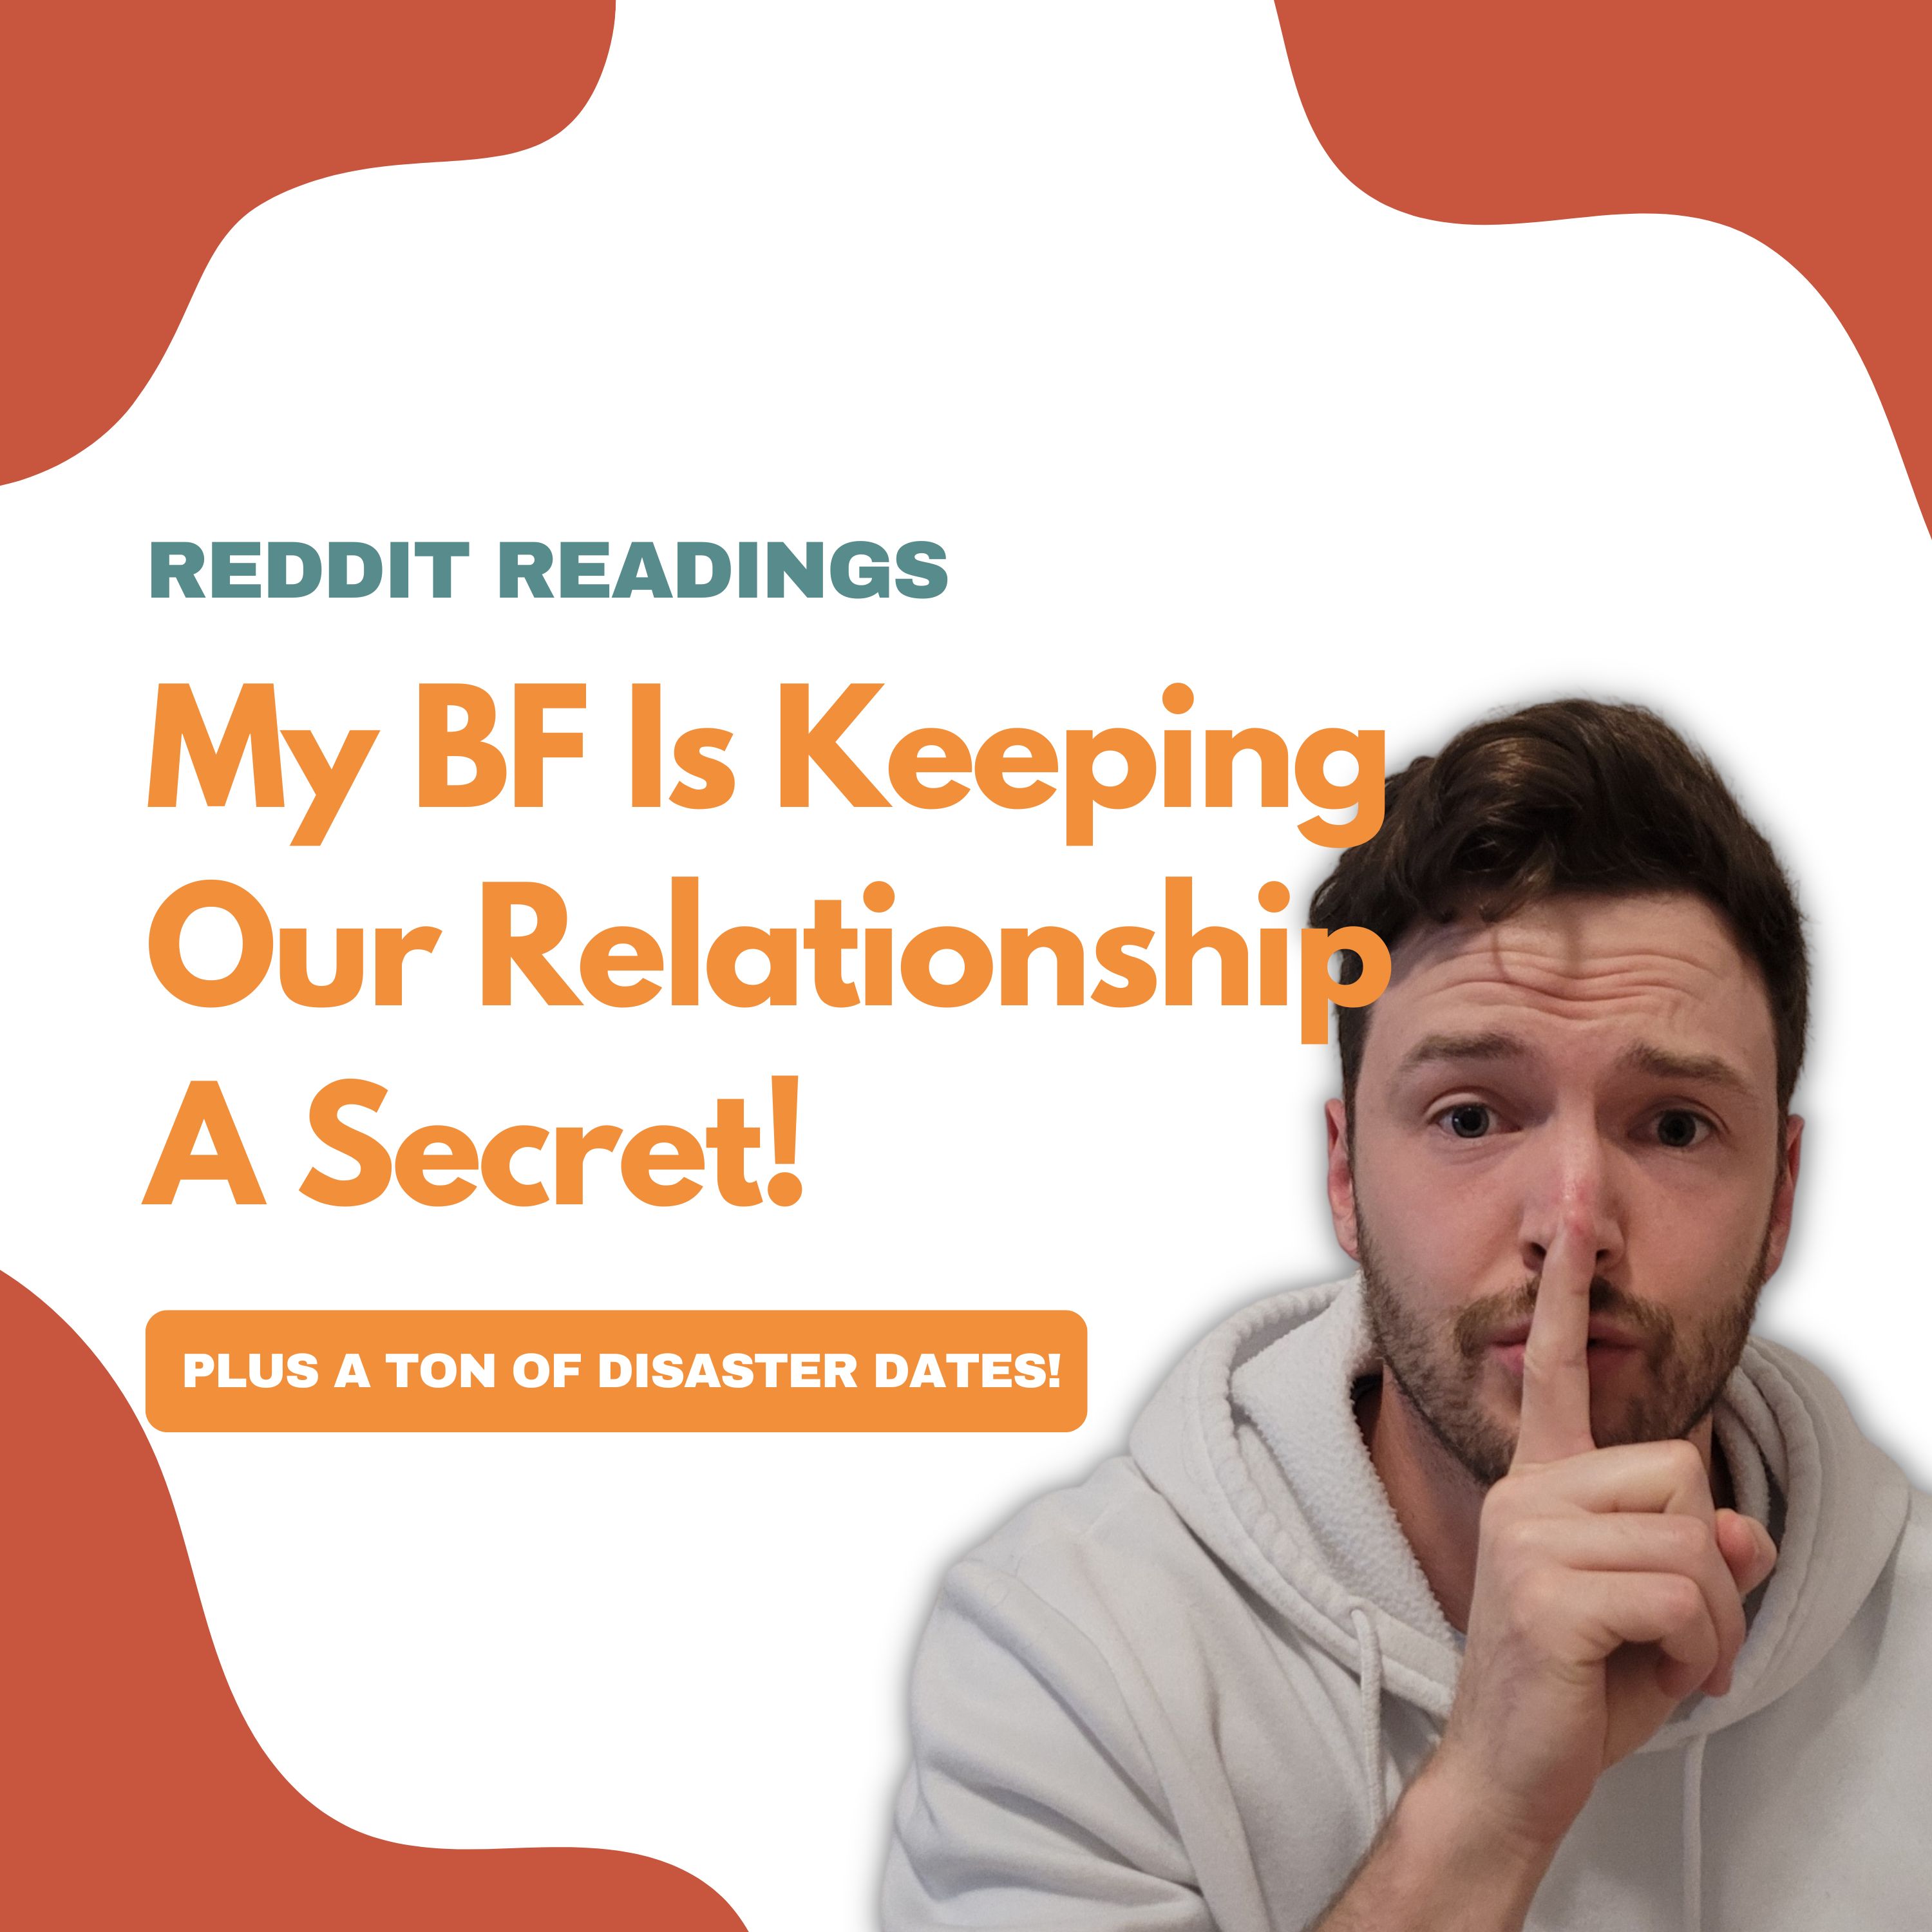 Reddit Readings | My BF Is Keeping Our Relationship A Secret!